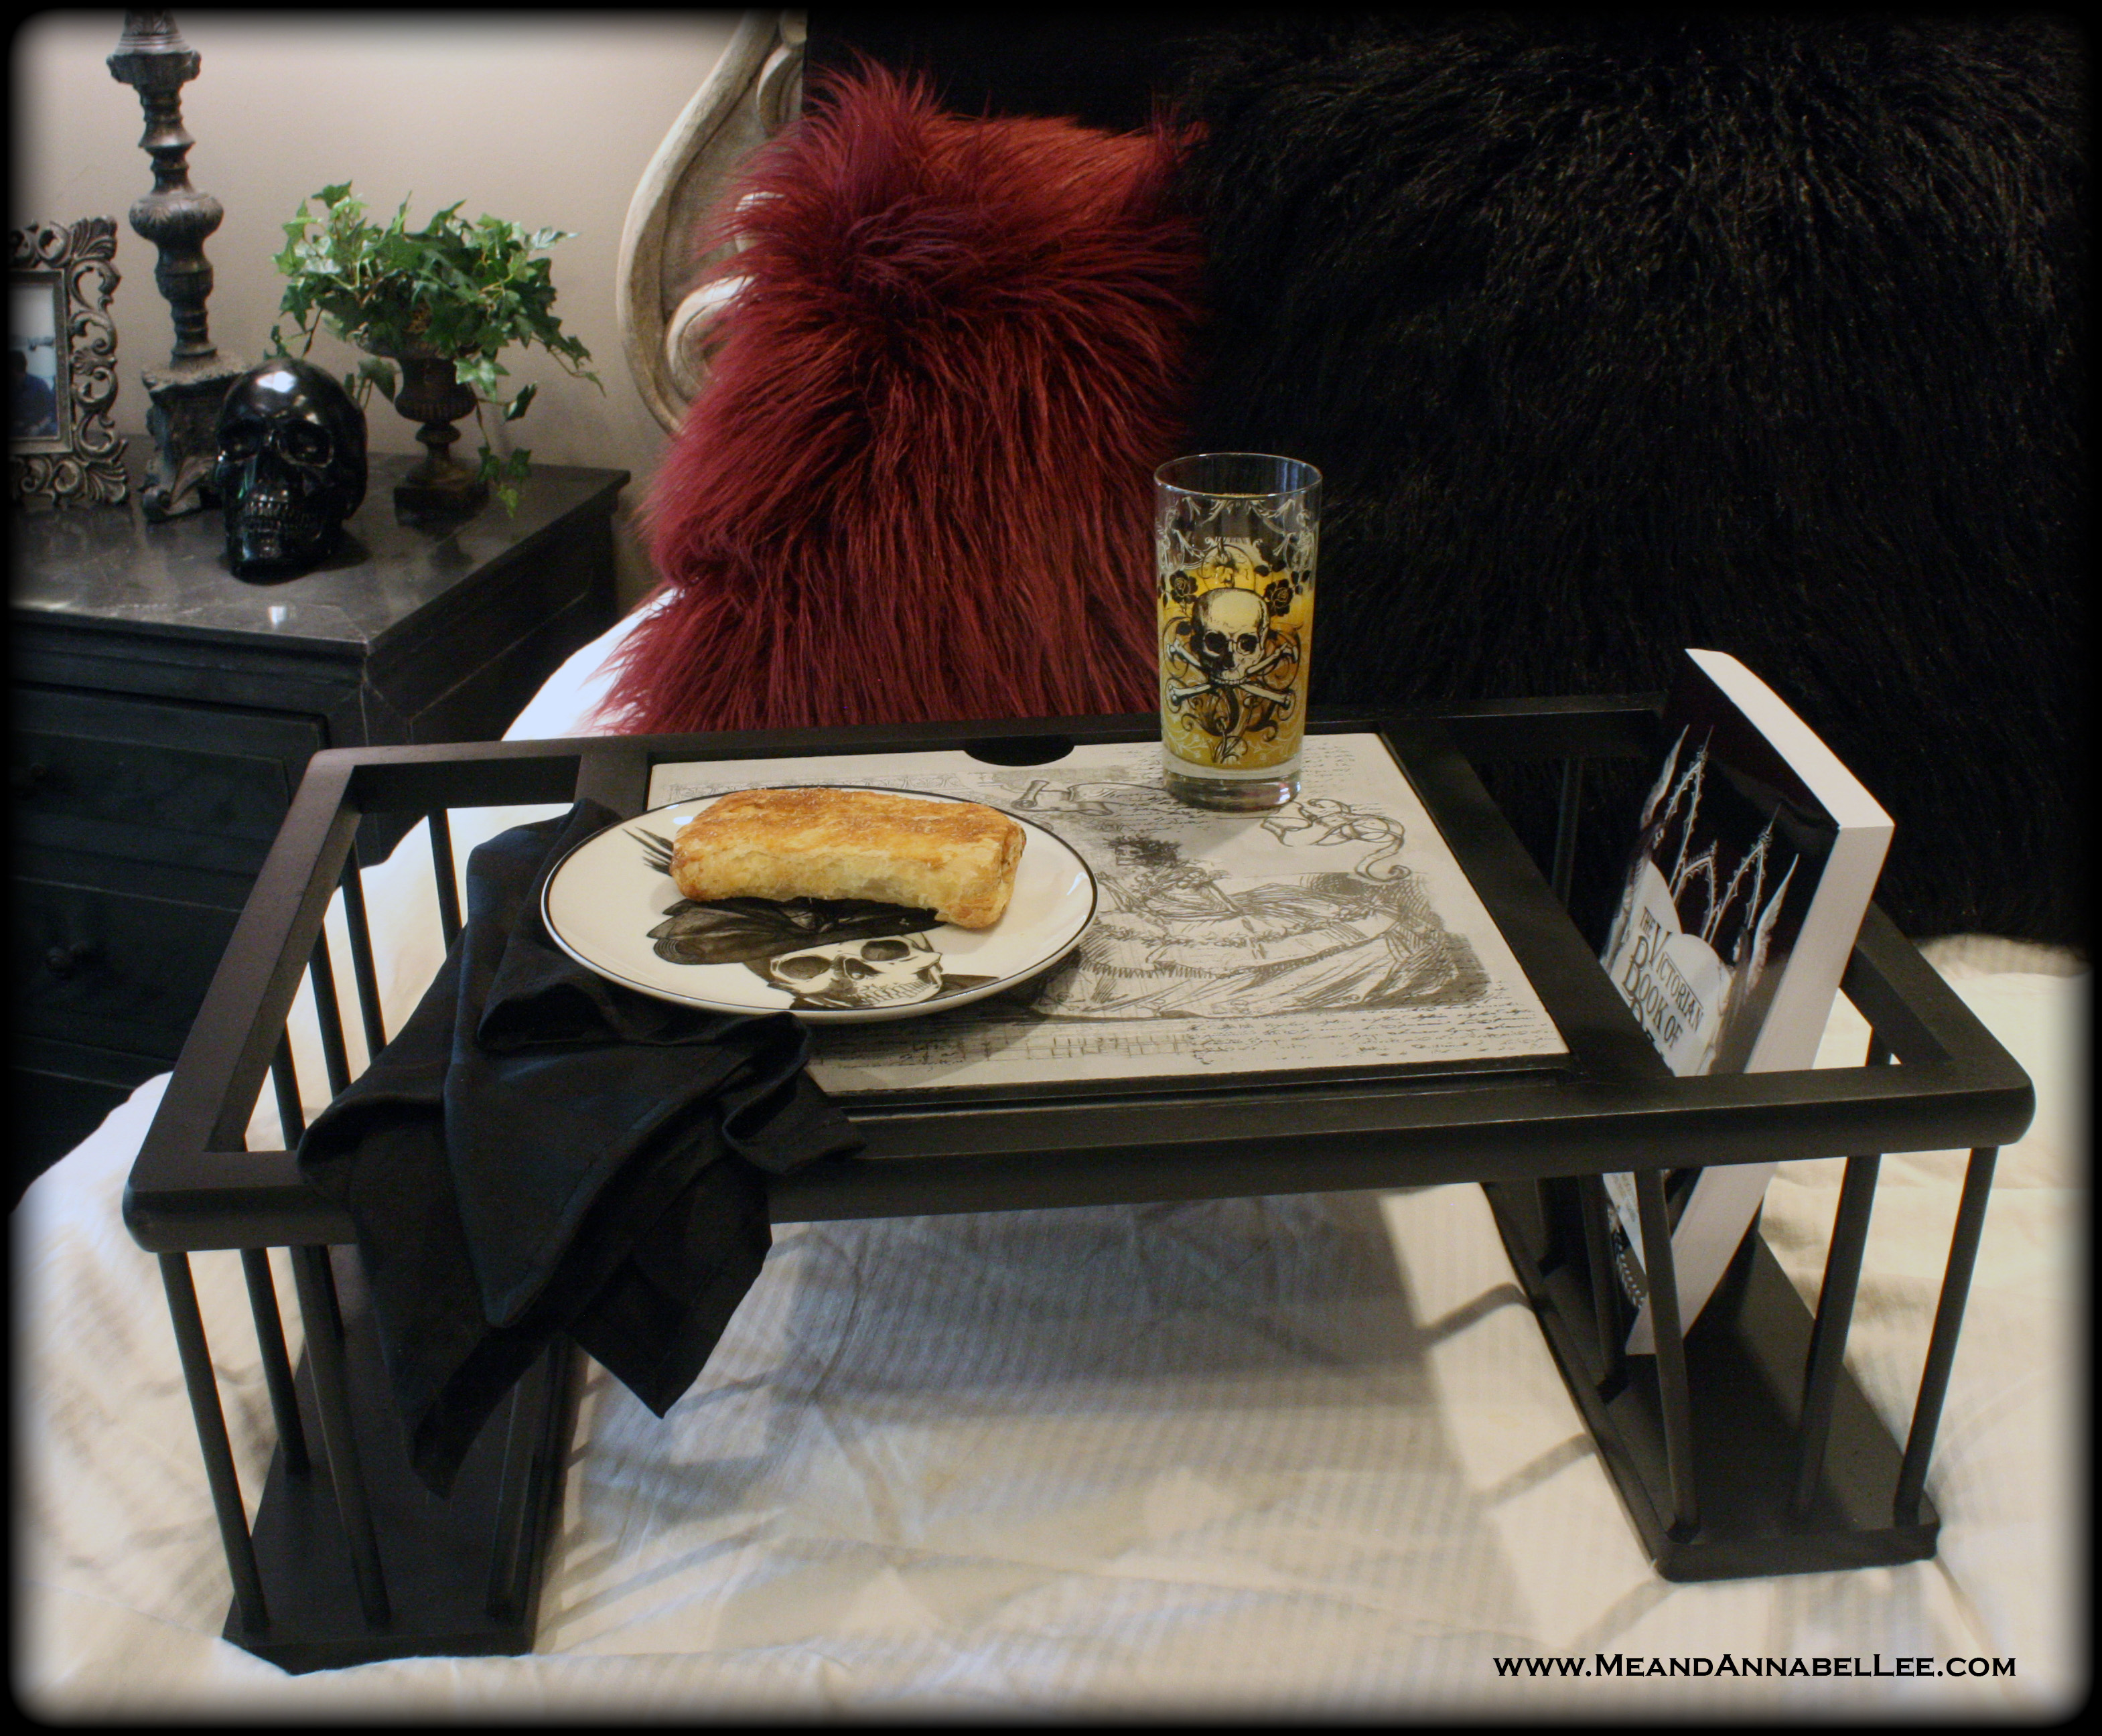 DIY Victorian Gothic Bed Tray | Breakfast in Bed | Gothic Bedroom | Goth Home Decor | www.MeandAnnabelLee.com